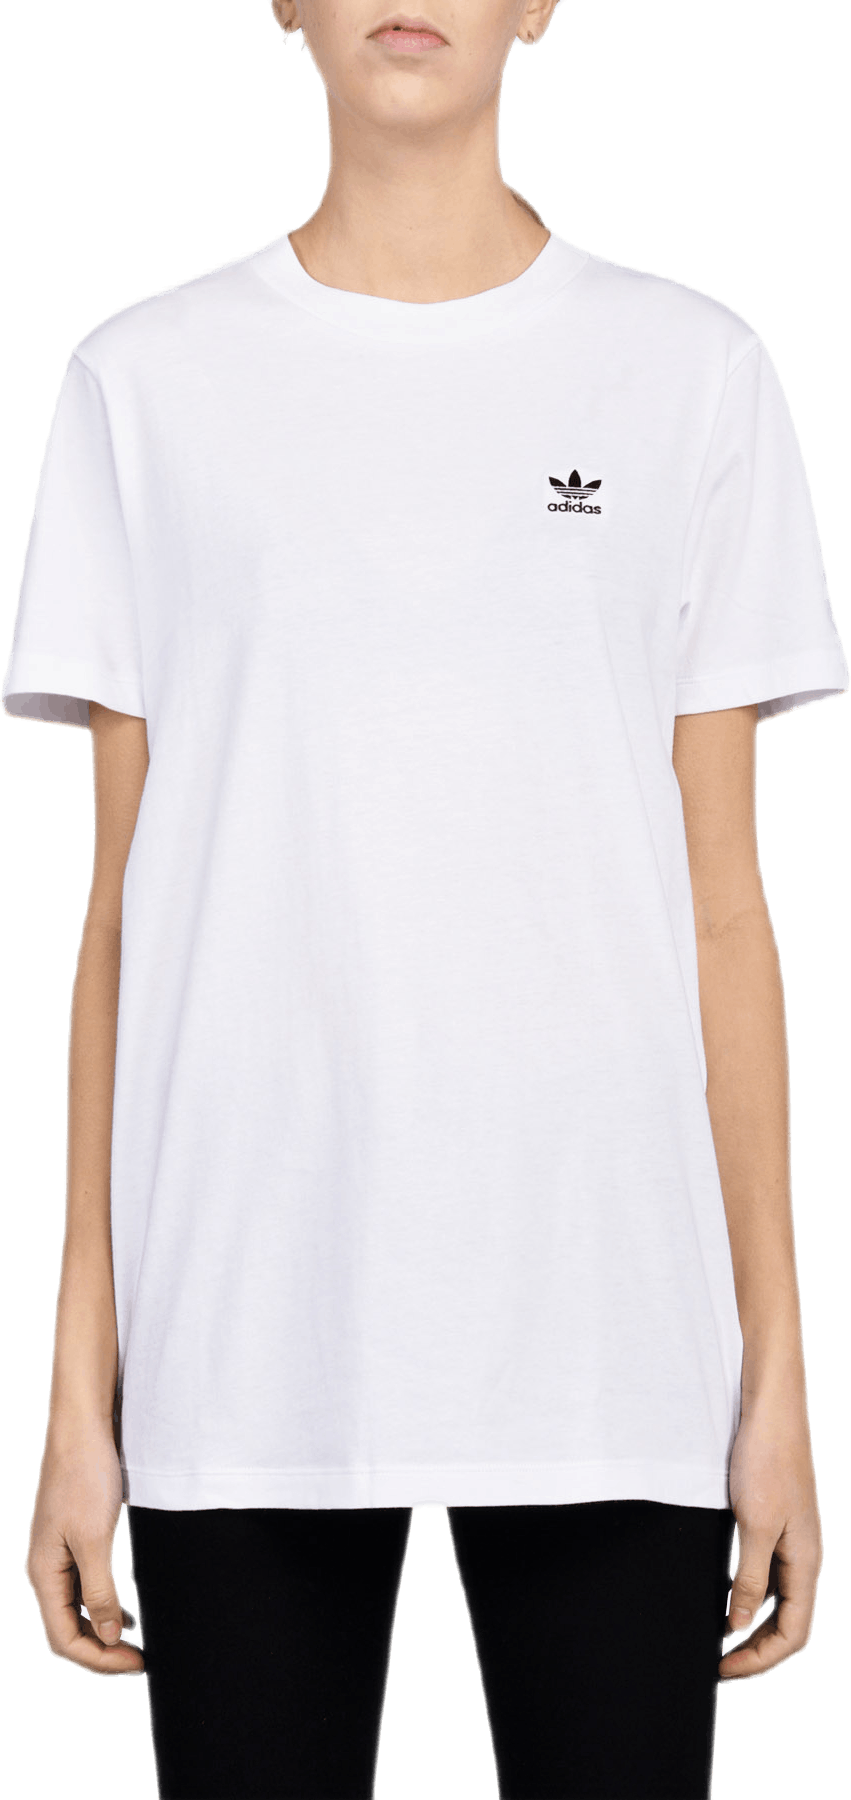 adidas styling complements tee